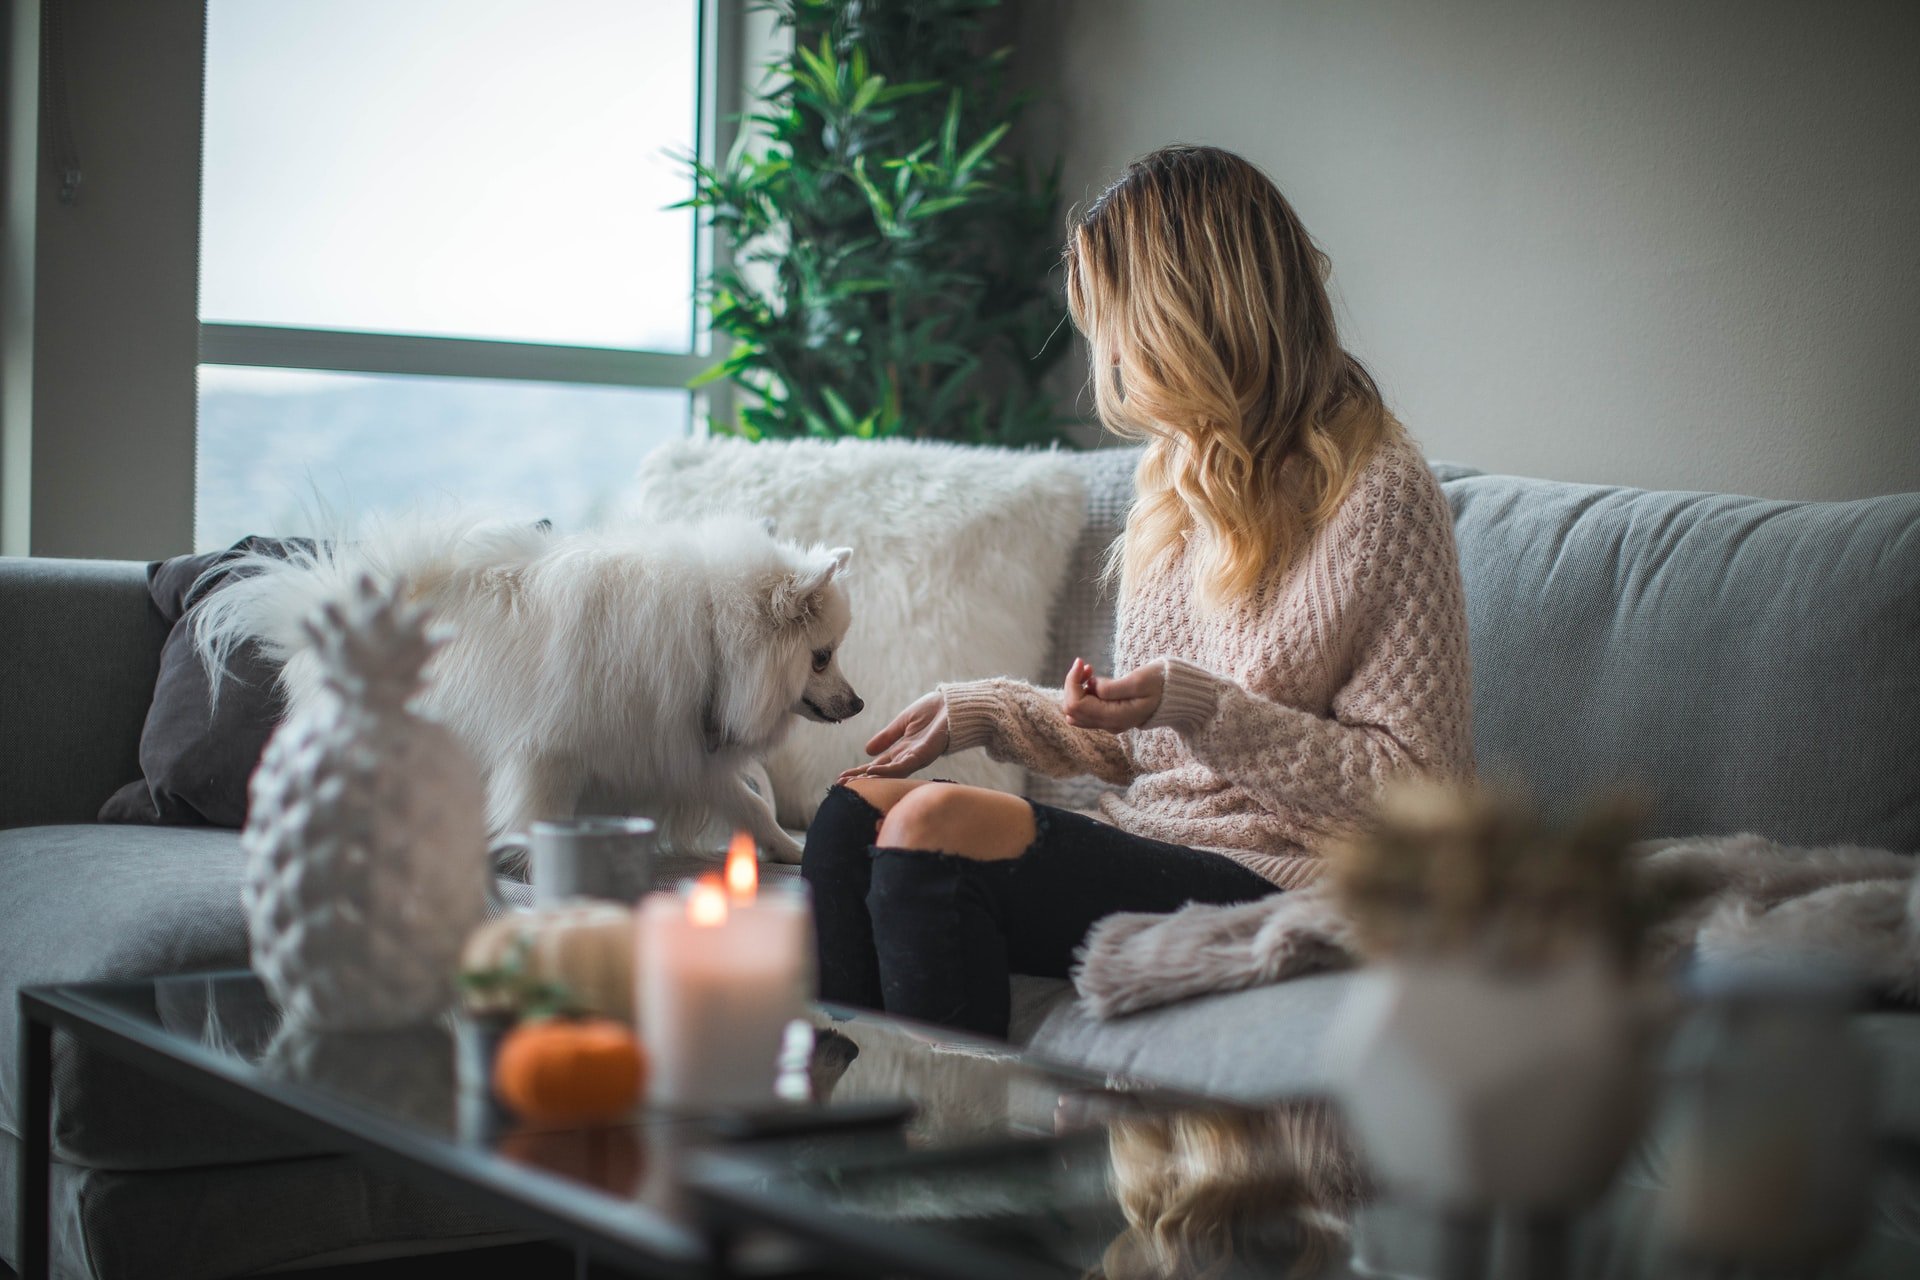 OP sitting with her dog in her room | Source: Unsplash